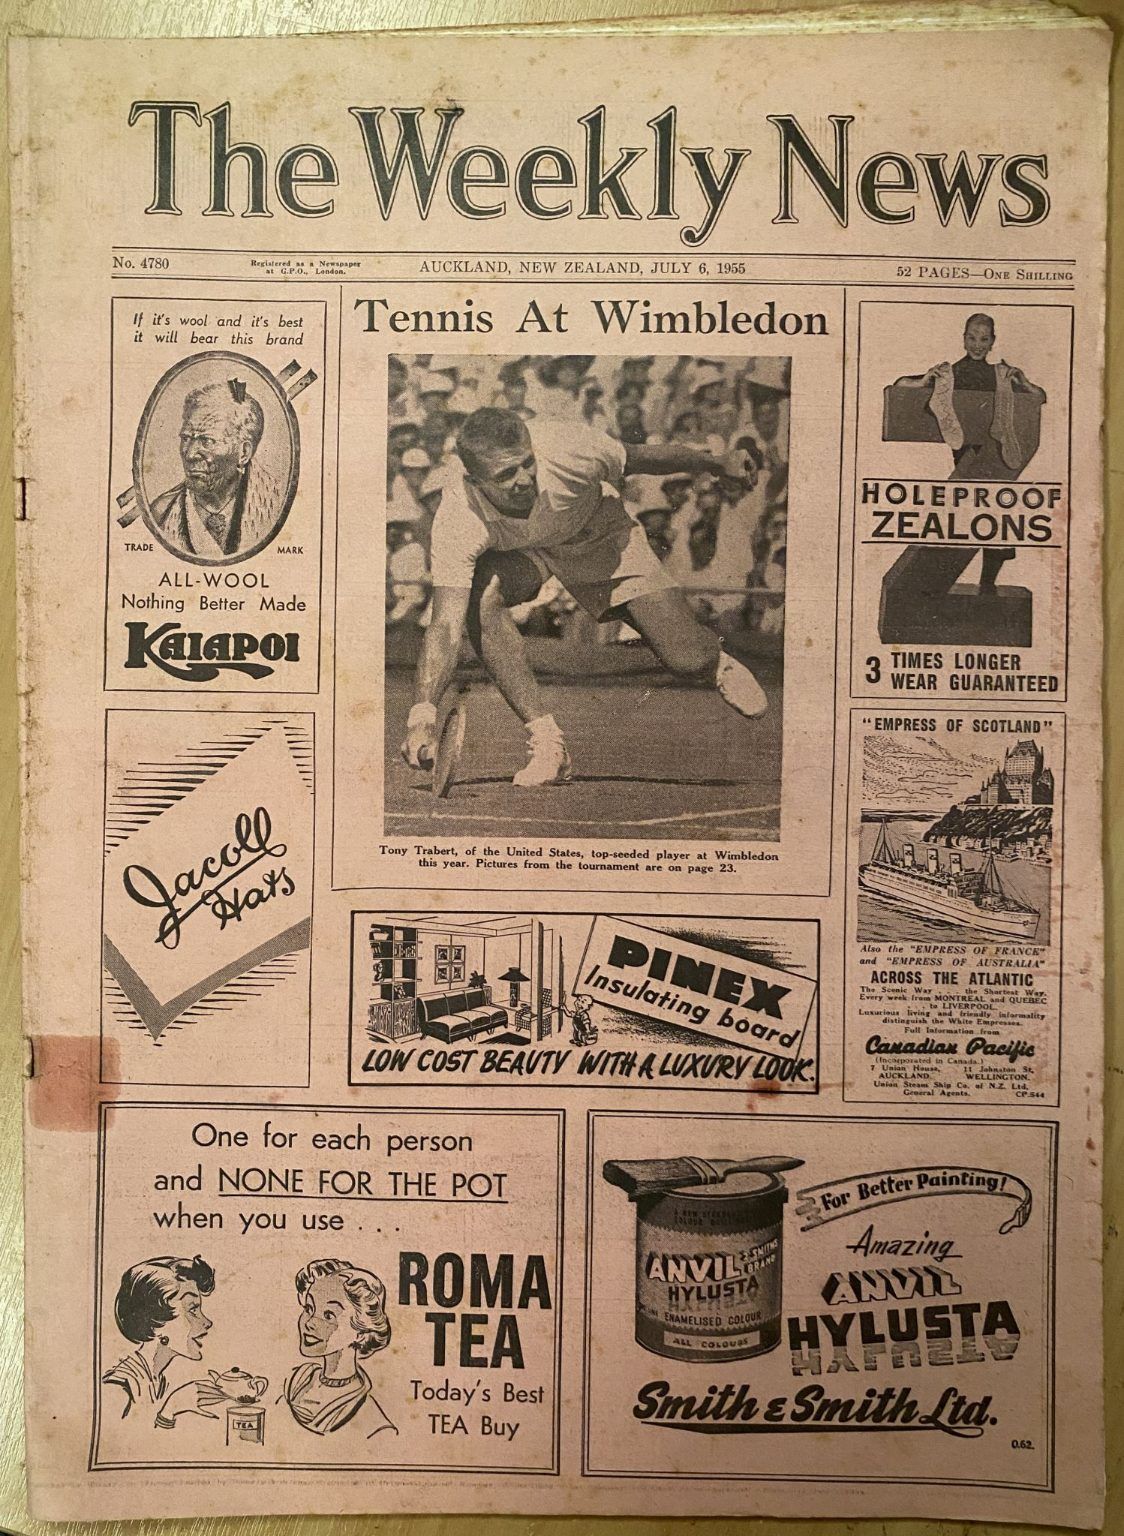 OLD NEWSPAPER: The Weekly News - No. 4780, 6 July 1955